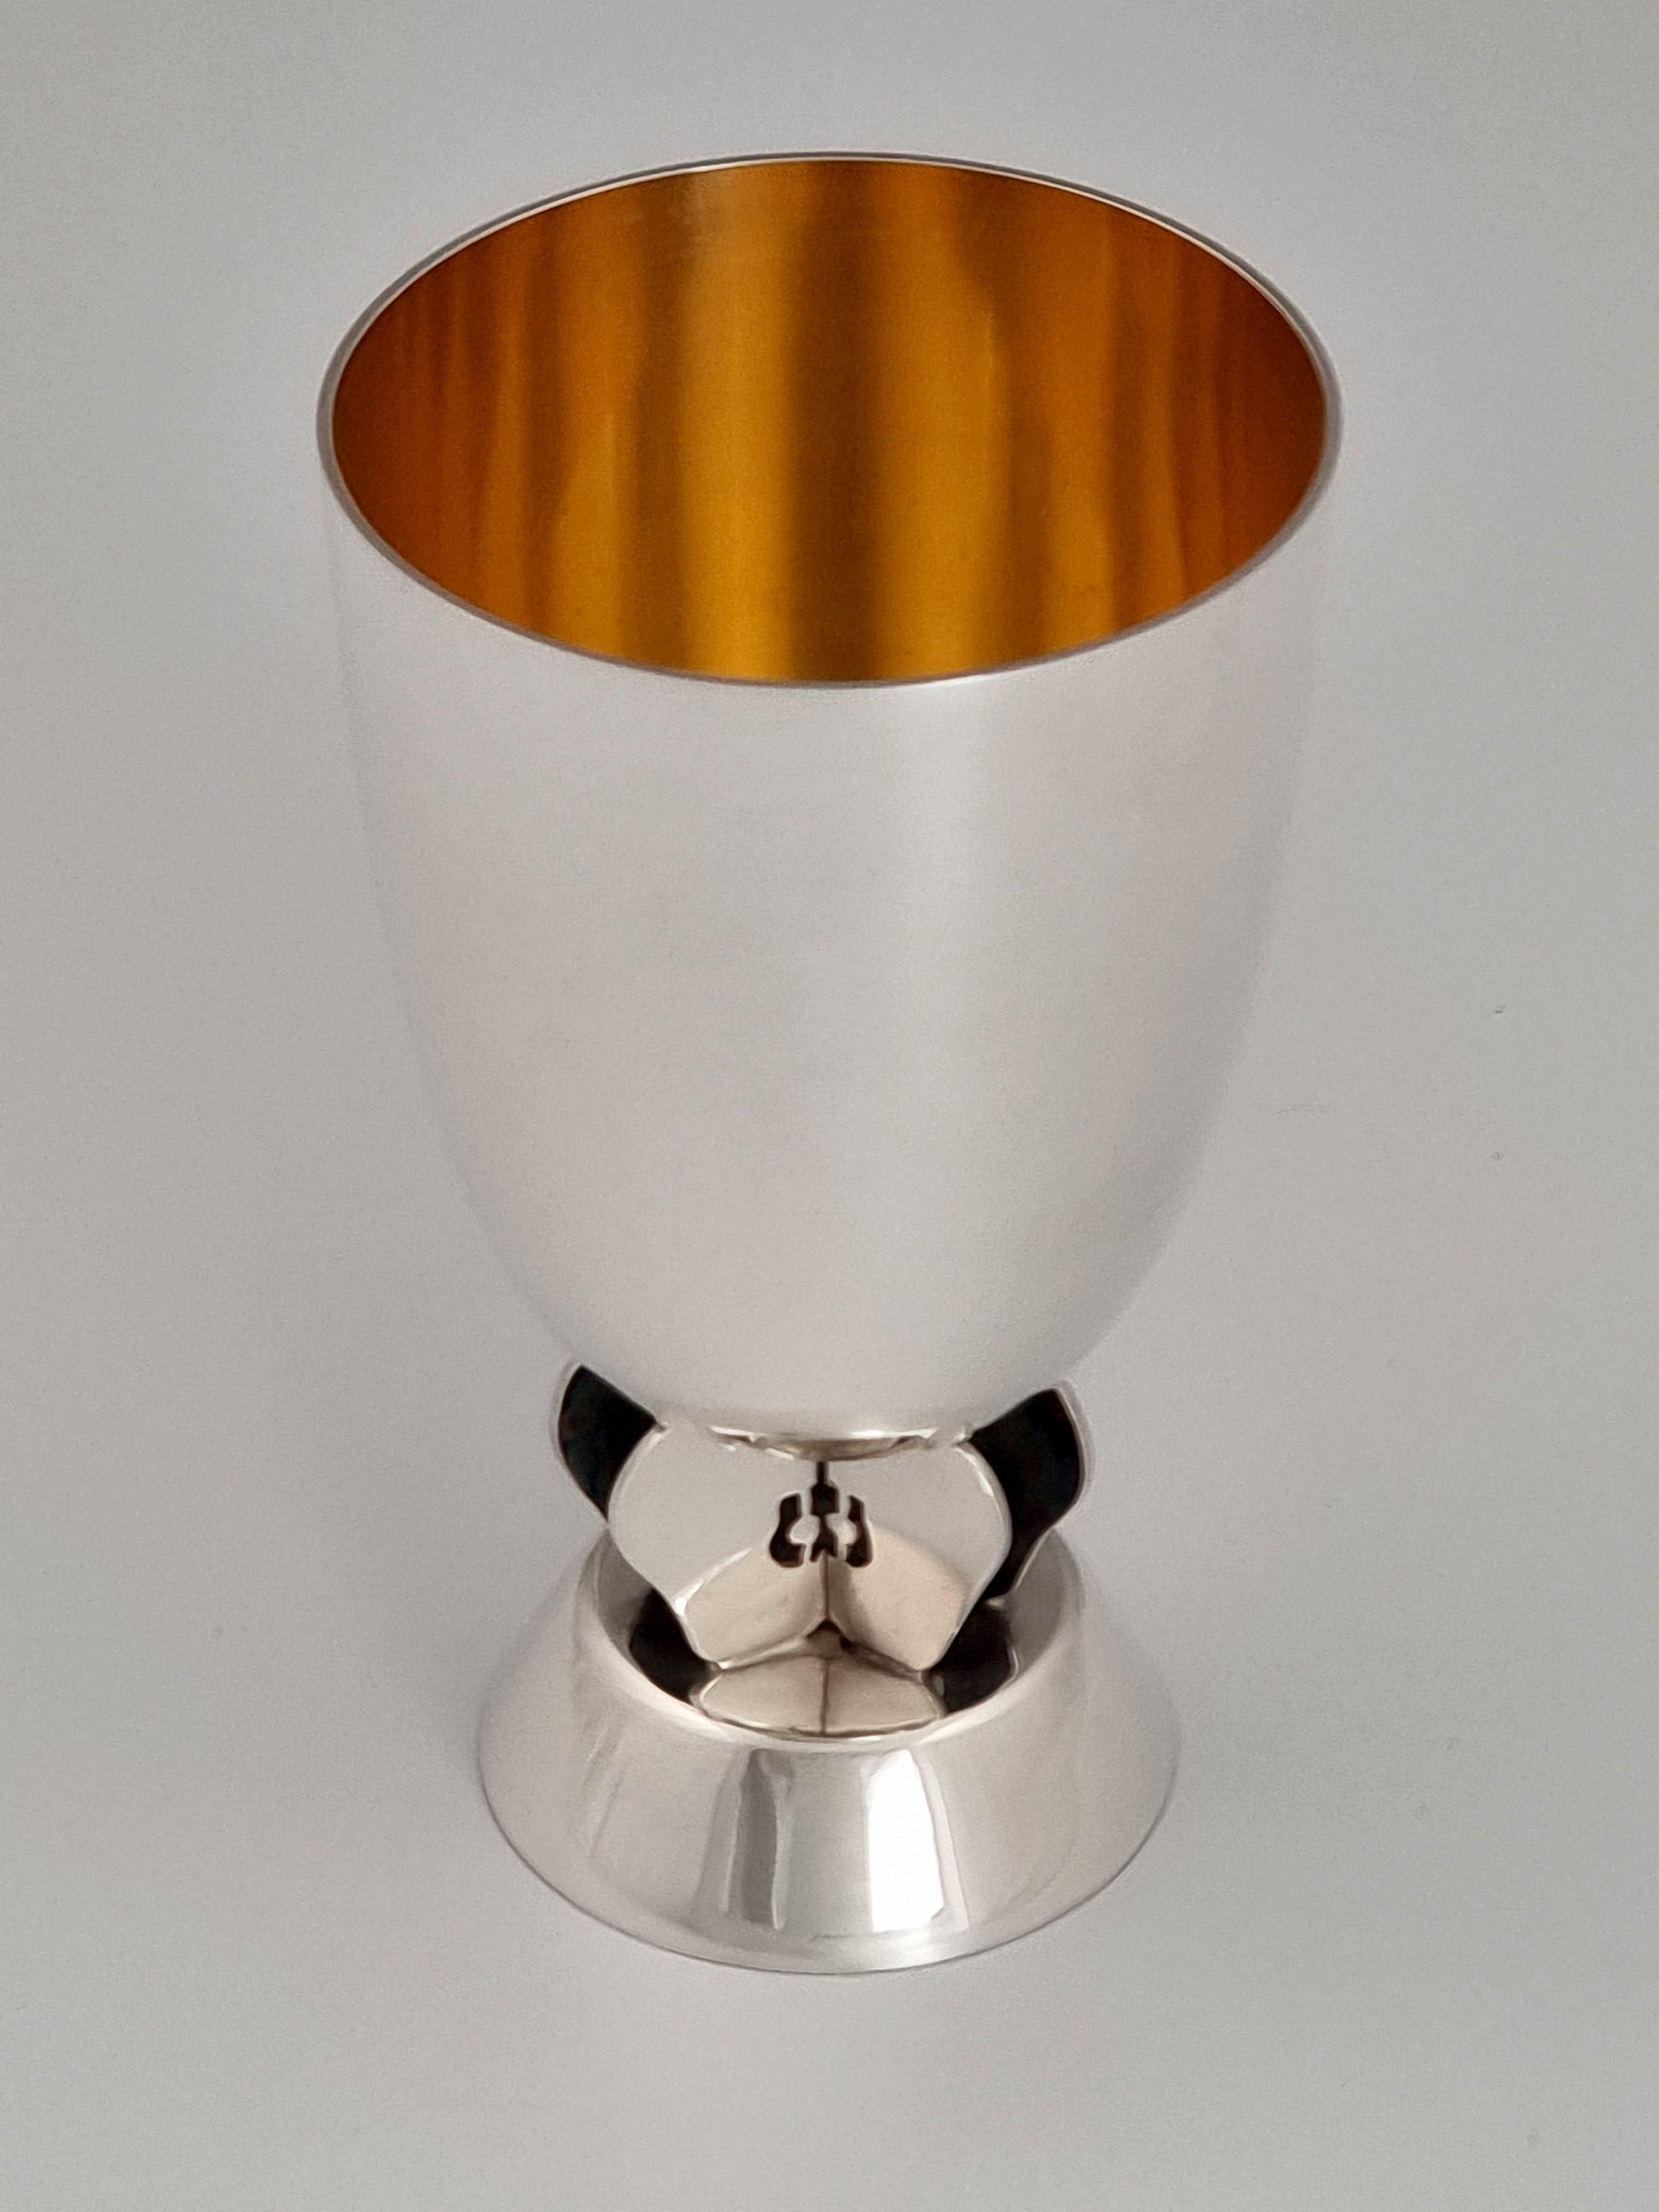 Apple kiddush Cup. This cup was designed in 2005. It is made of sterling silver and measures 4½" high.